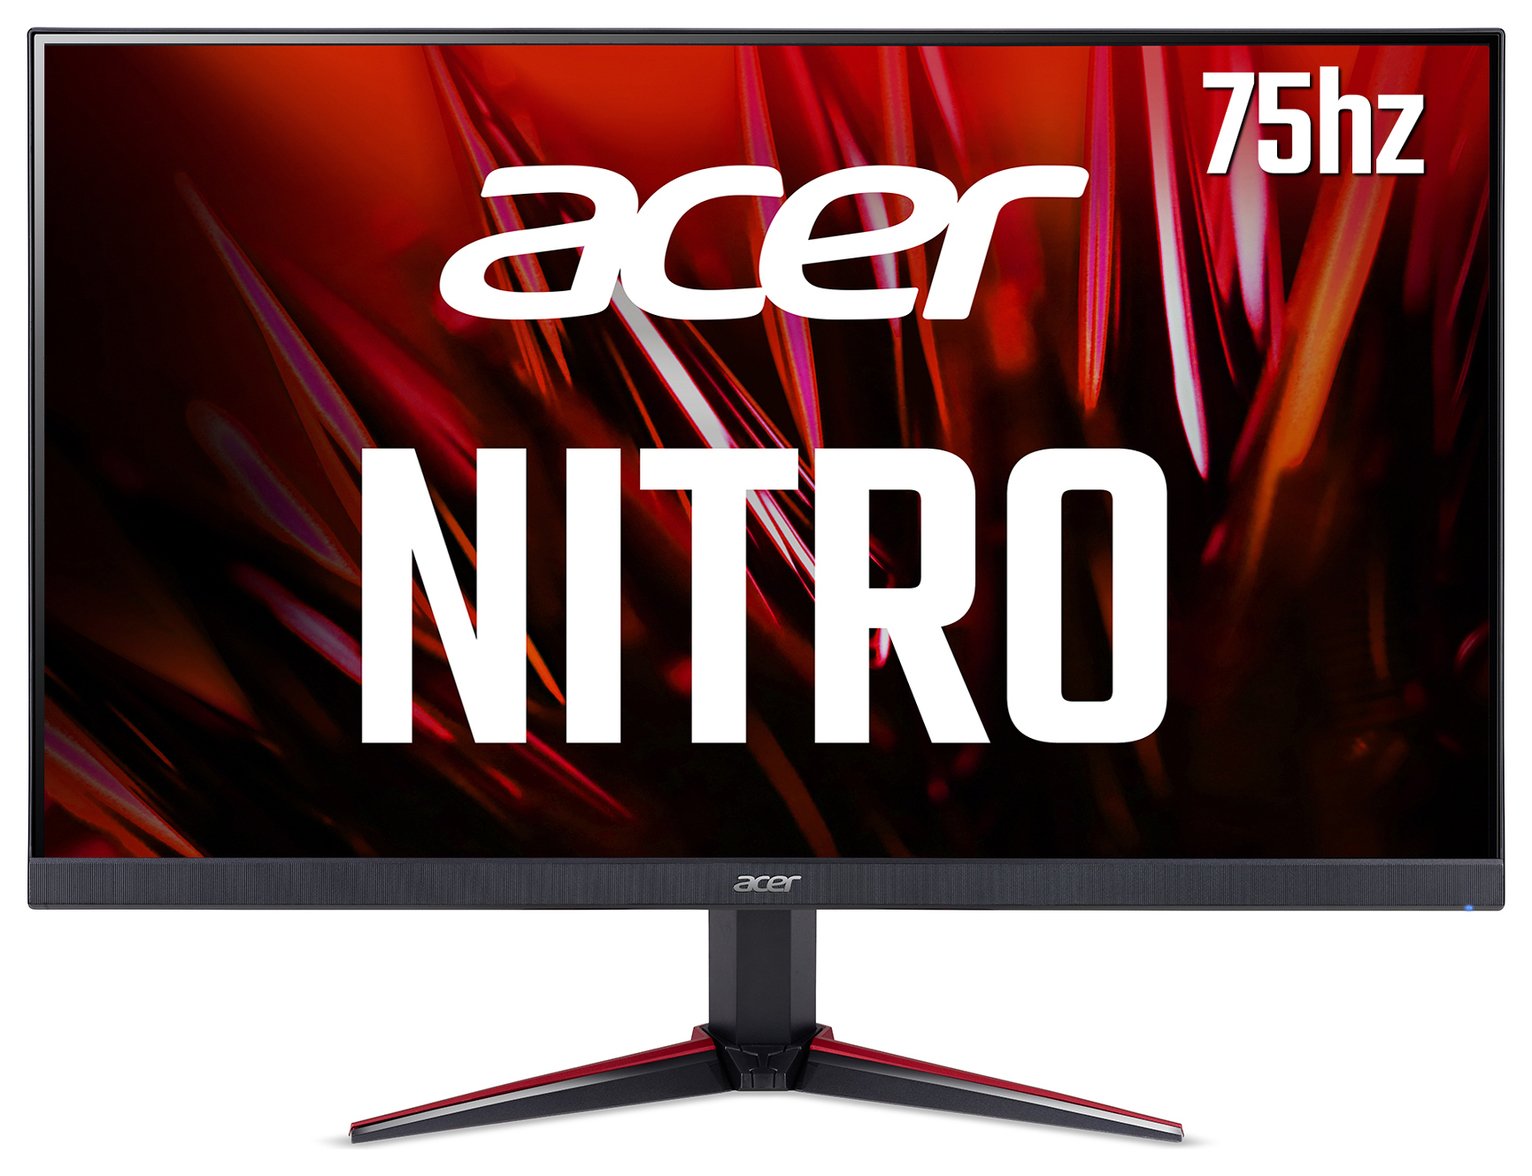 Acer Nitro Vg270 27 Inch Fhd Ips Gaming Monitor Reviews